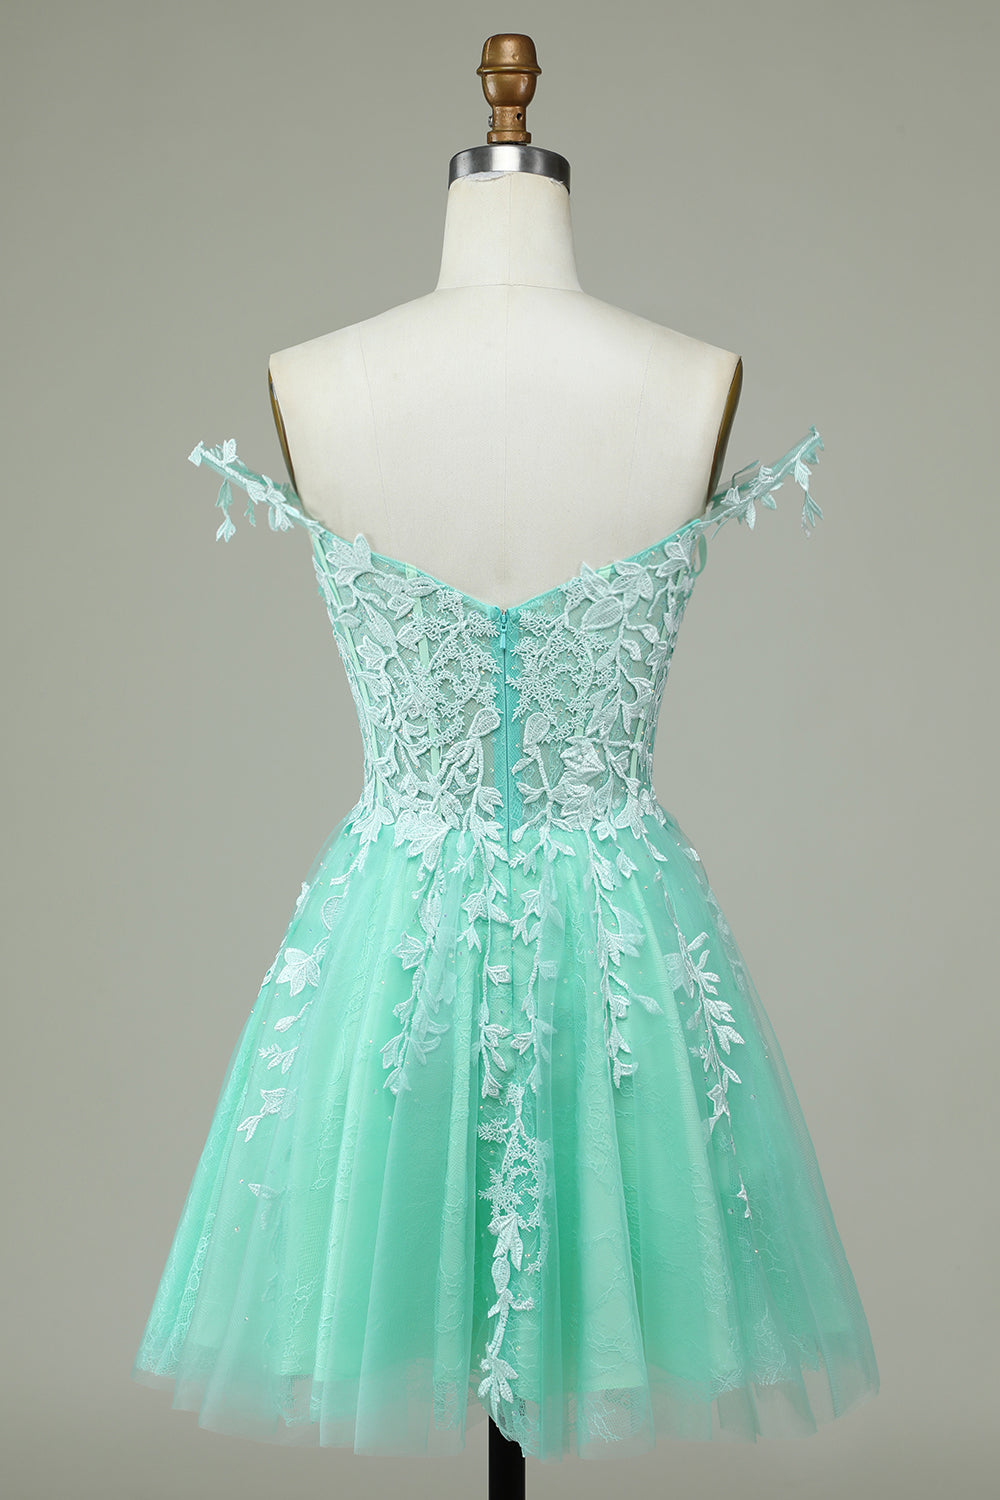 Cute A Line Spaghetti Straps Light Green Short Homecoming Dress with Appliques